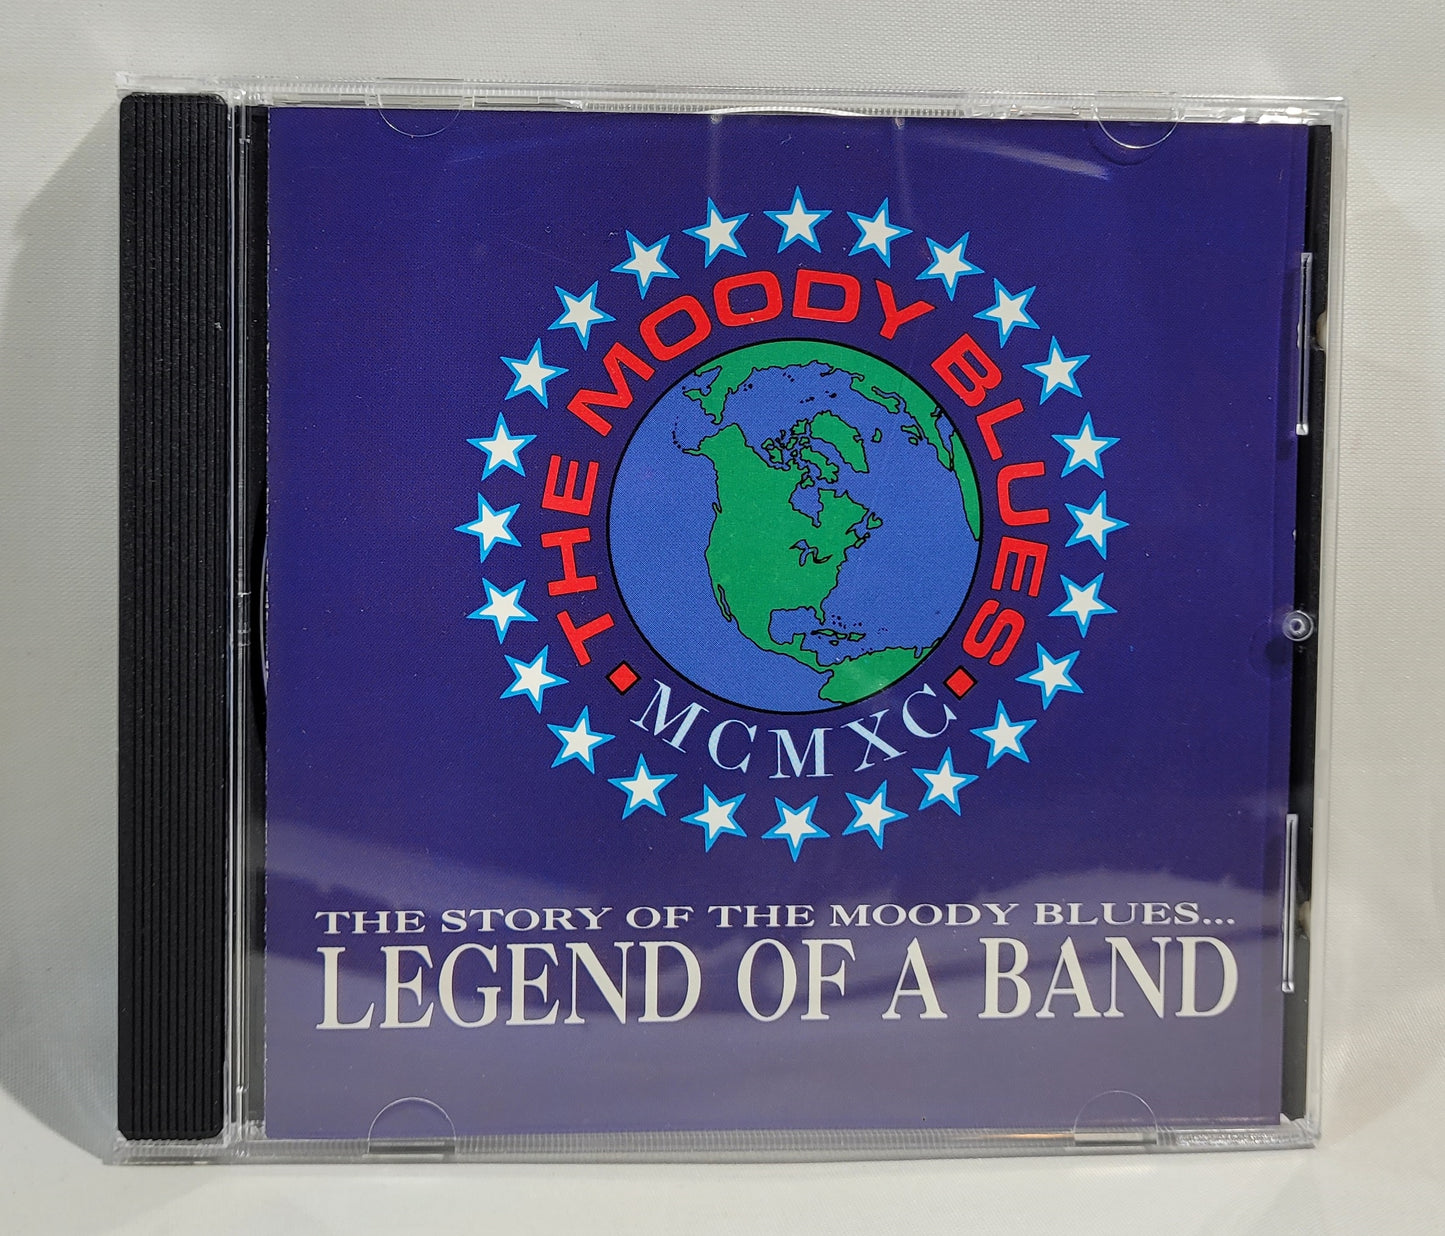 The Moody Blues - The Story of The Moody Blues...Legend of a Band [CD]